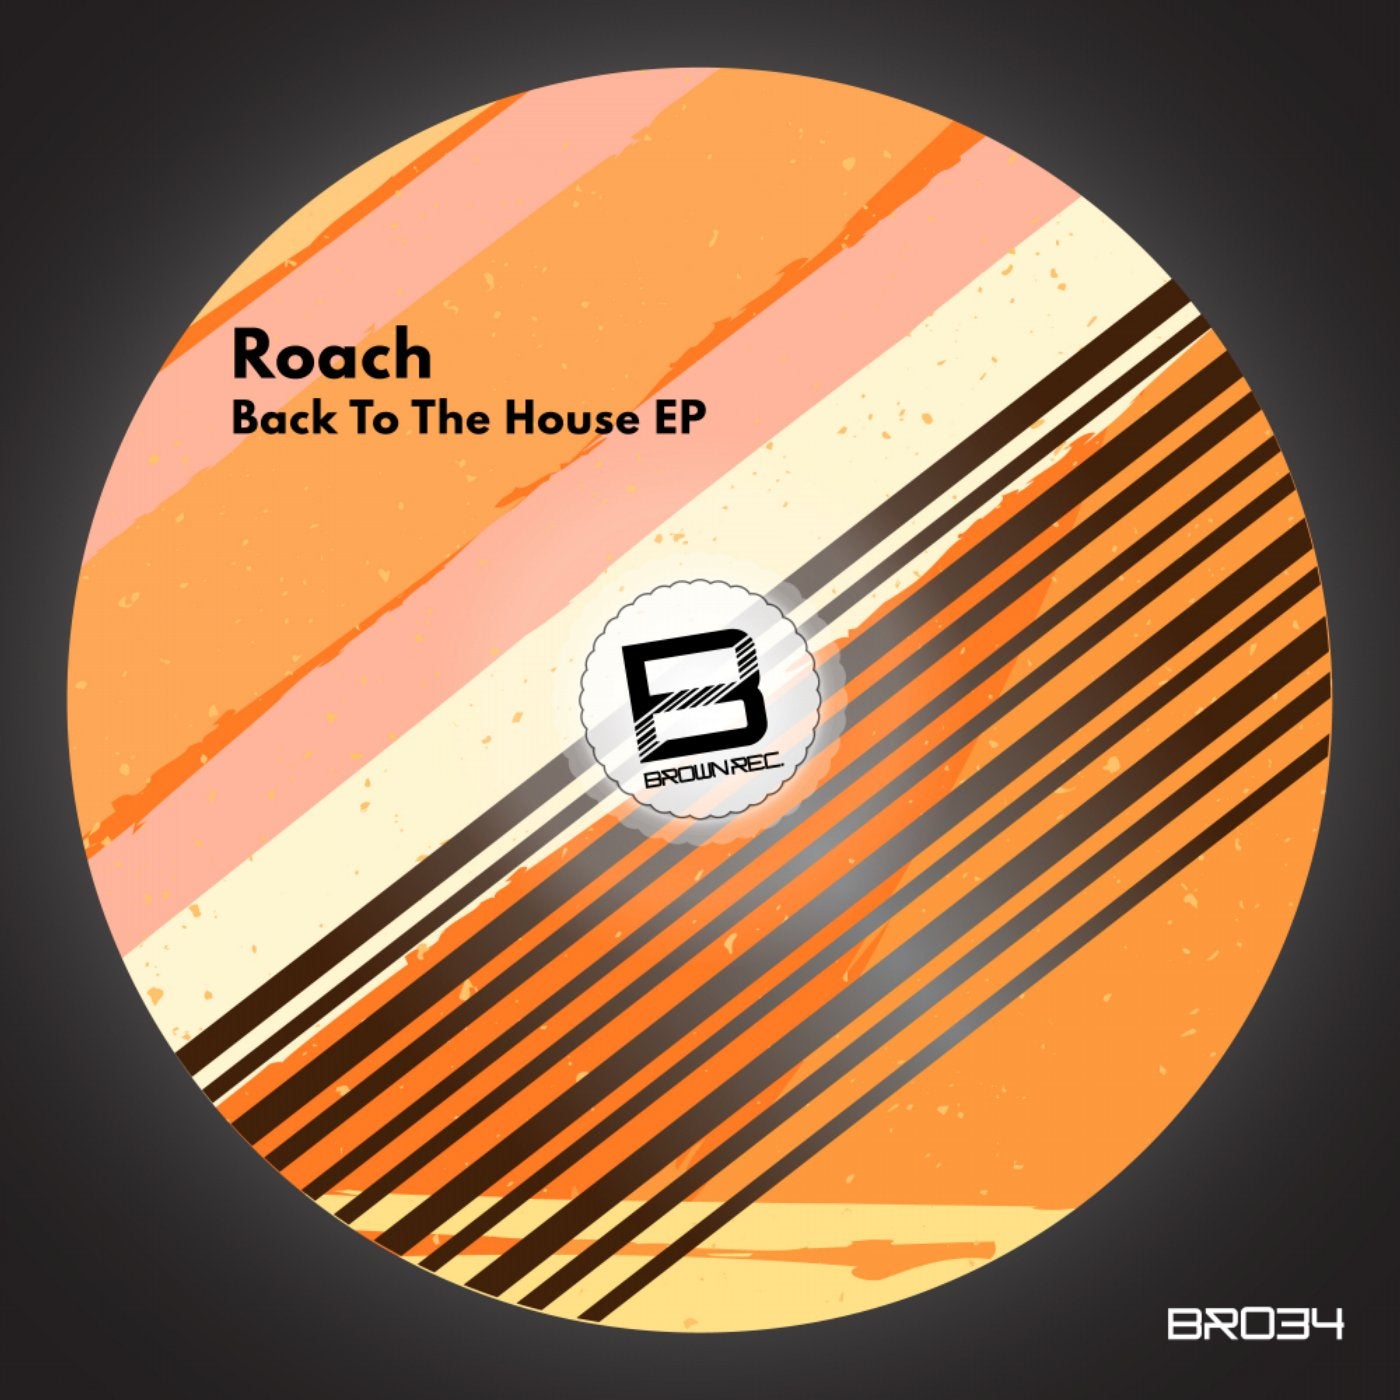 Back To The House EP